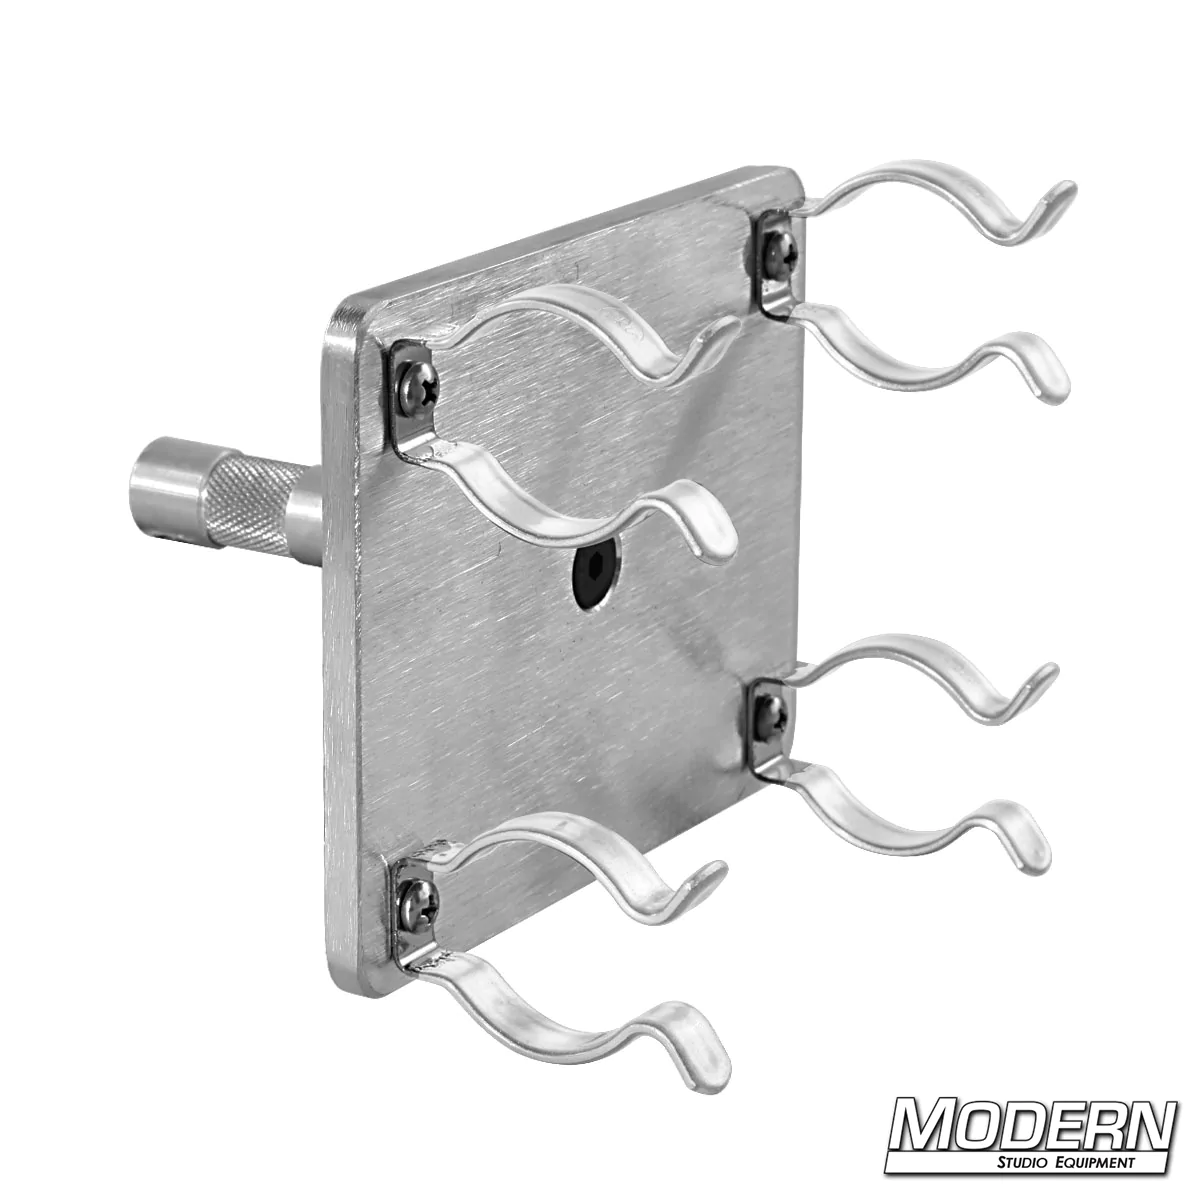 Dual Fluorescent T12 Lamp Holder with 5/8-inch Pin and Rubber Clips